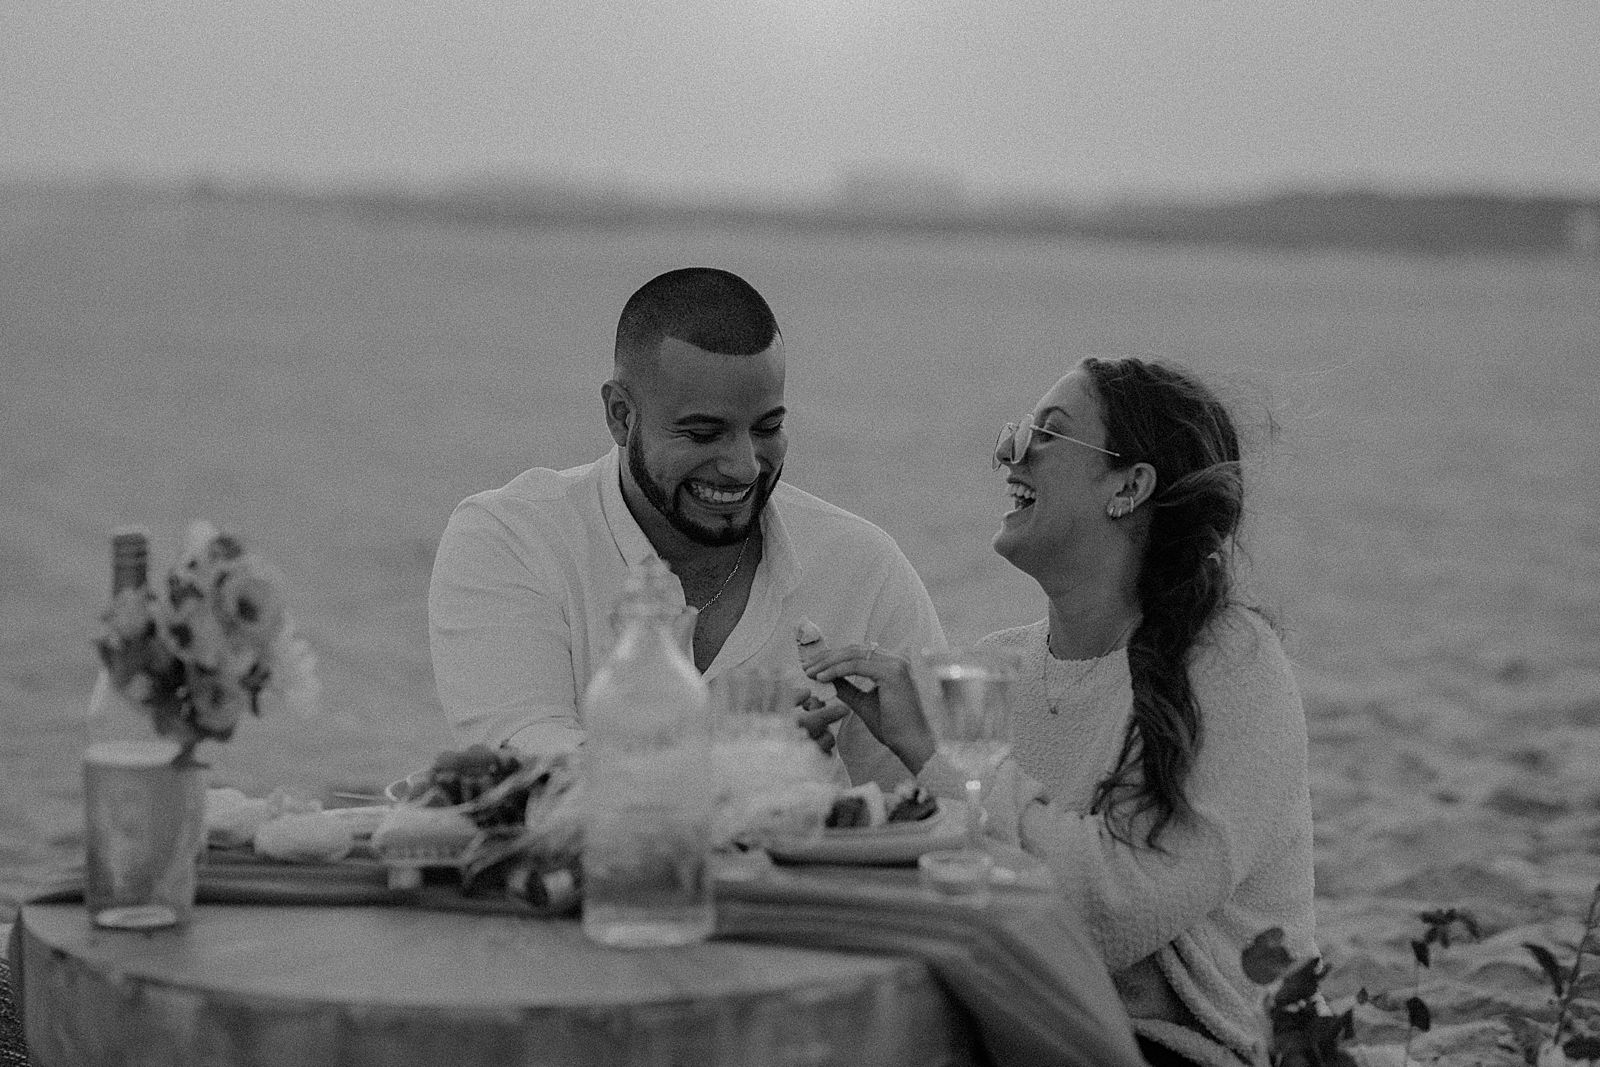 B&W couple eating together and celebrating engagement